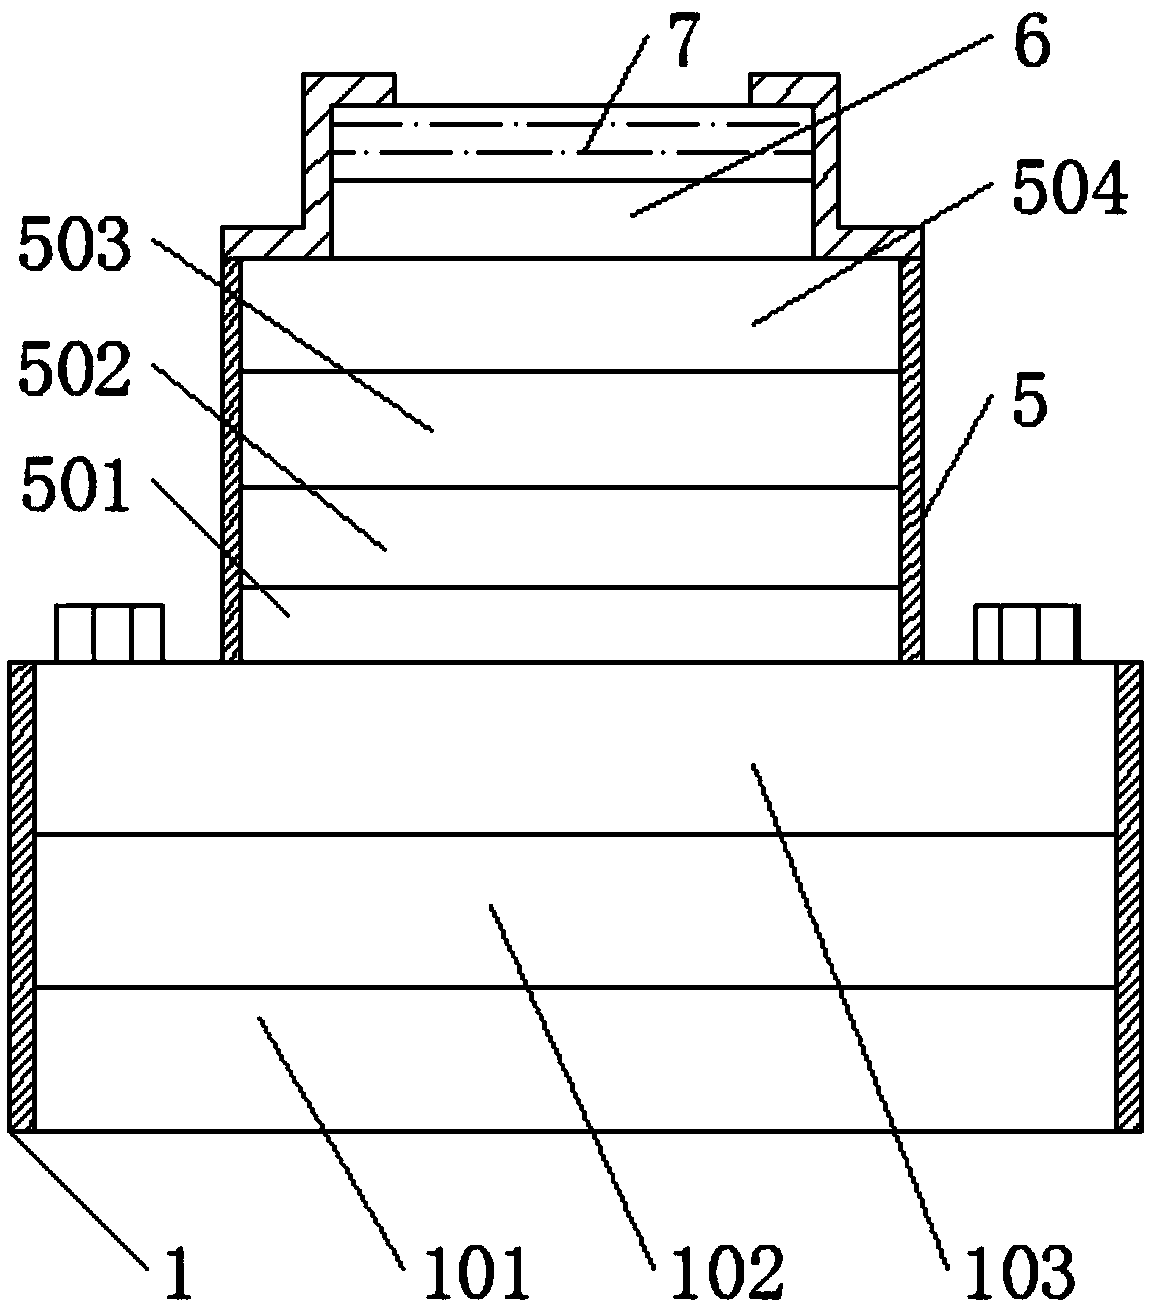 An epitaxial wafer for a diode